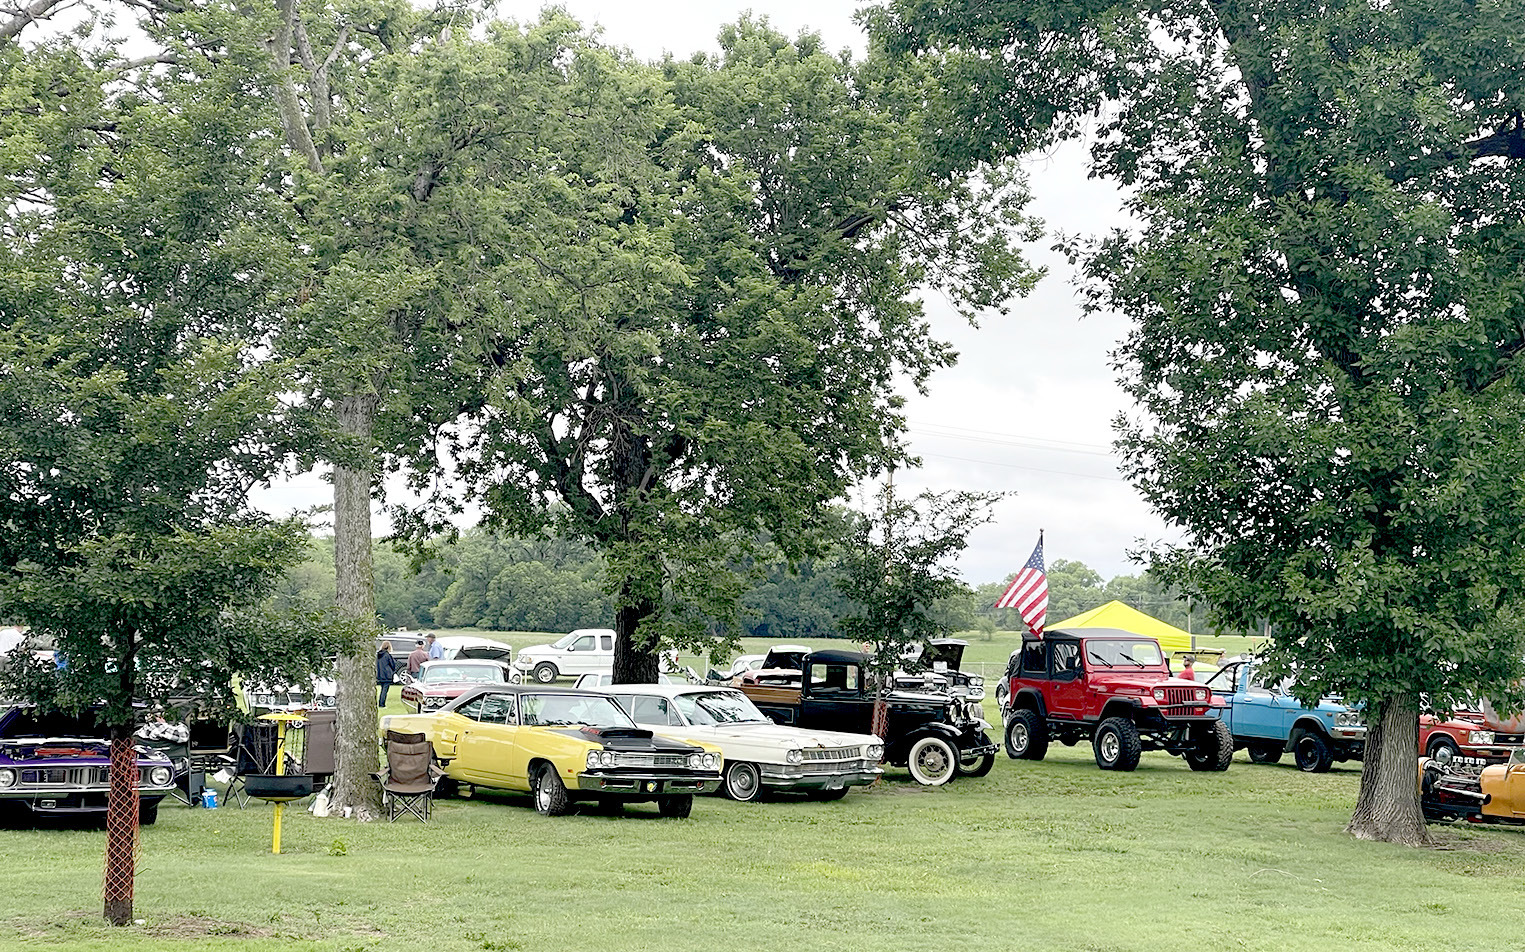 THE VINTAGE CARS were lined up under the canopy of shade trees at the Stockton City Park during the Swing Into Summer Festival Car Show held on Saturday, June 17th. Everyone enjoyed the cars, games, and vendors the event had to offer.